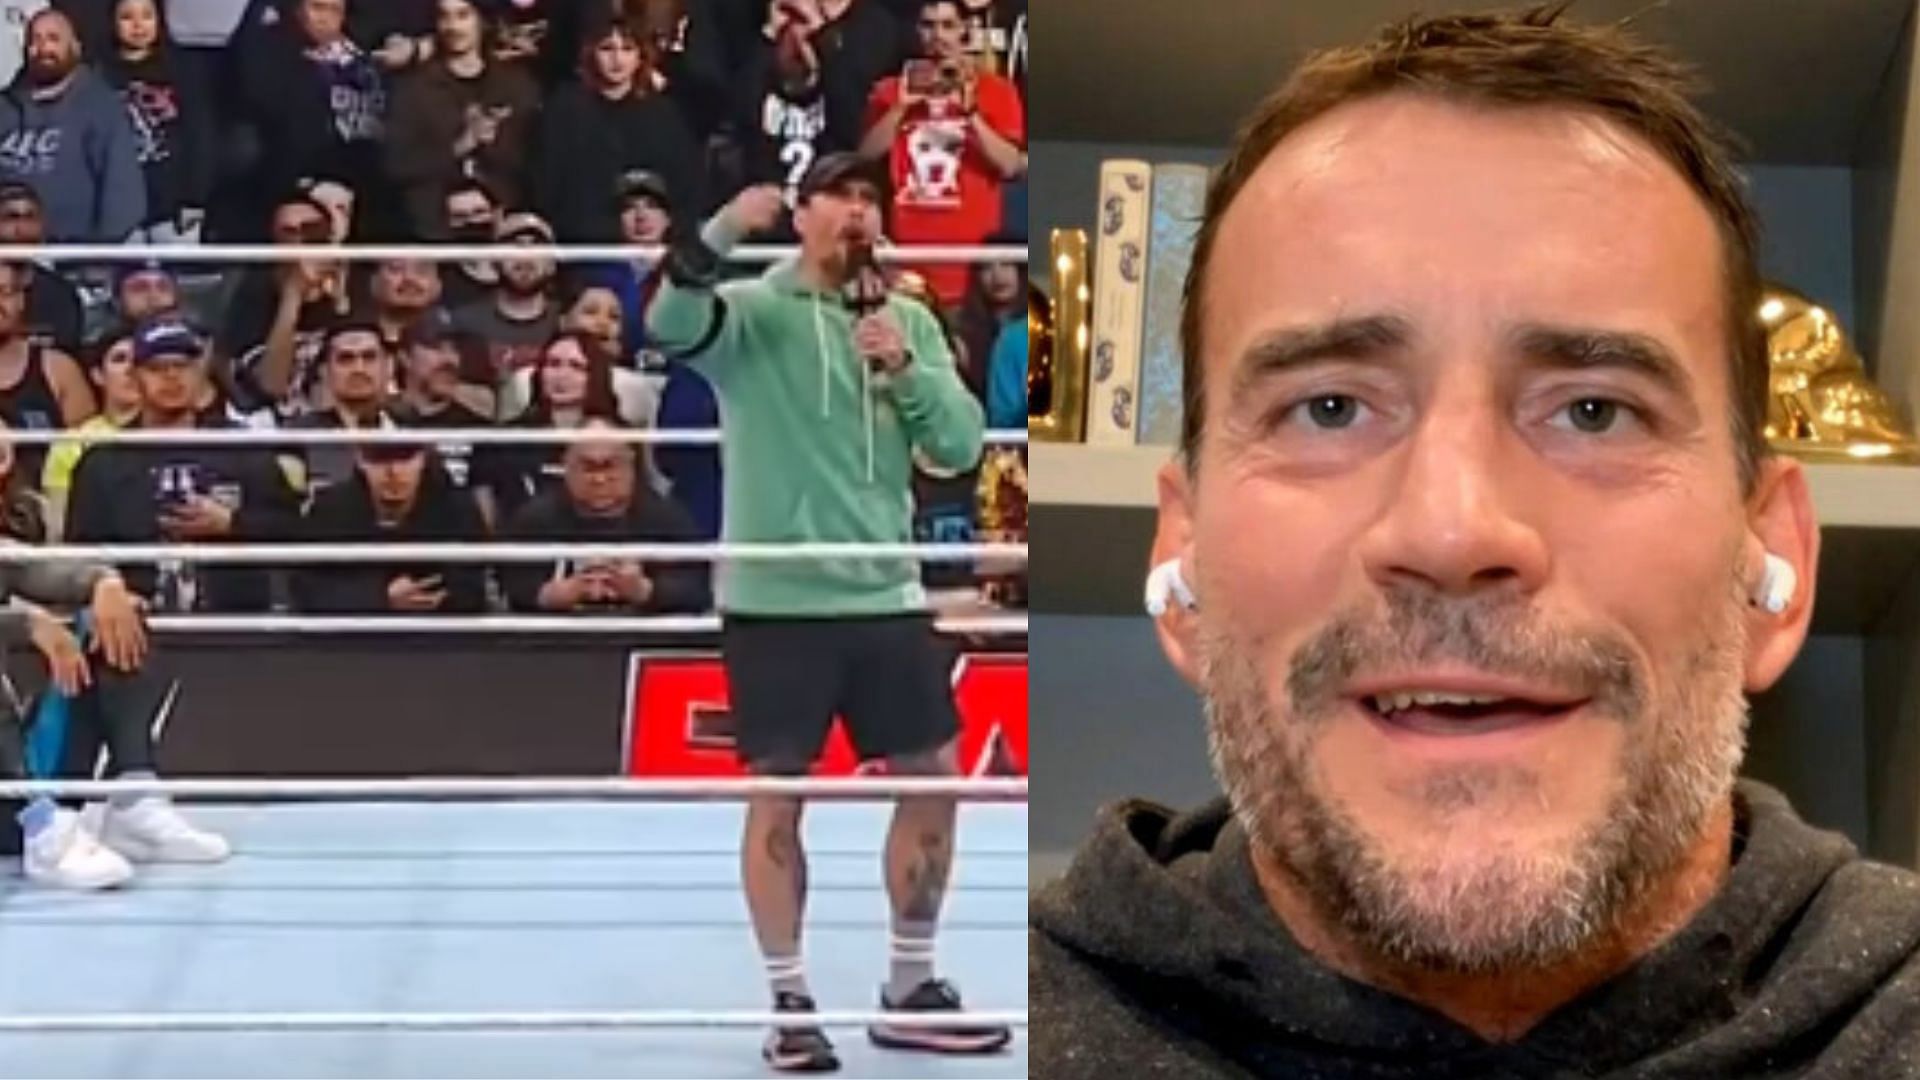 CM Punk appeared after WWE RAW ended.